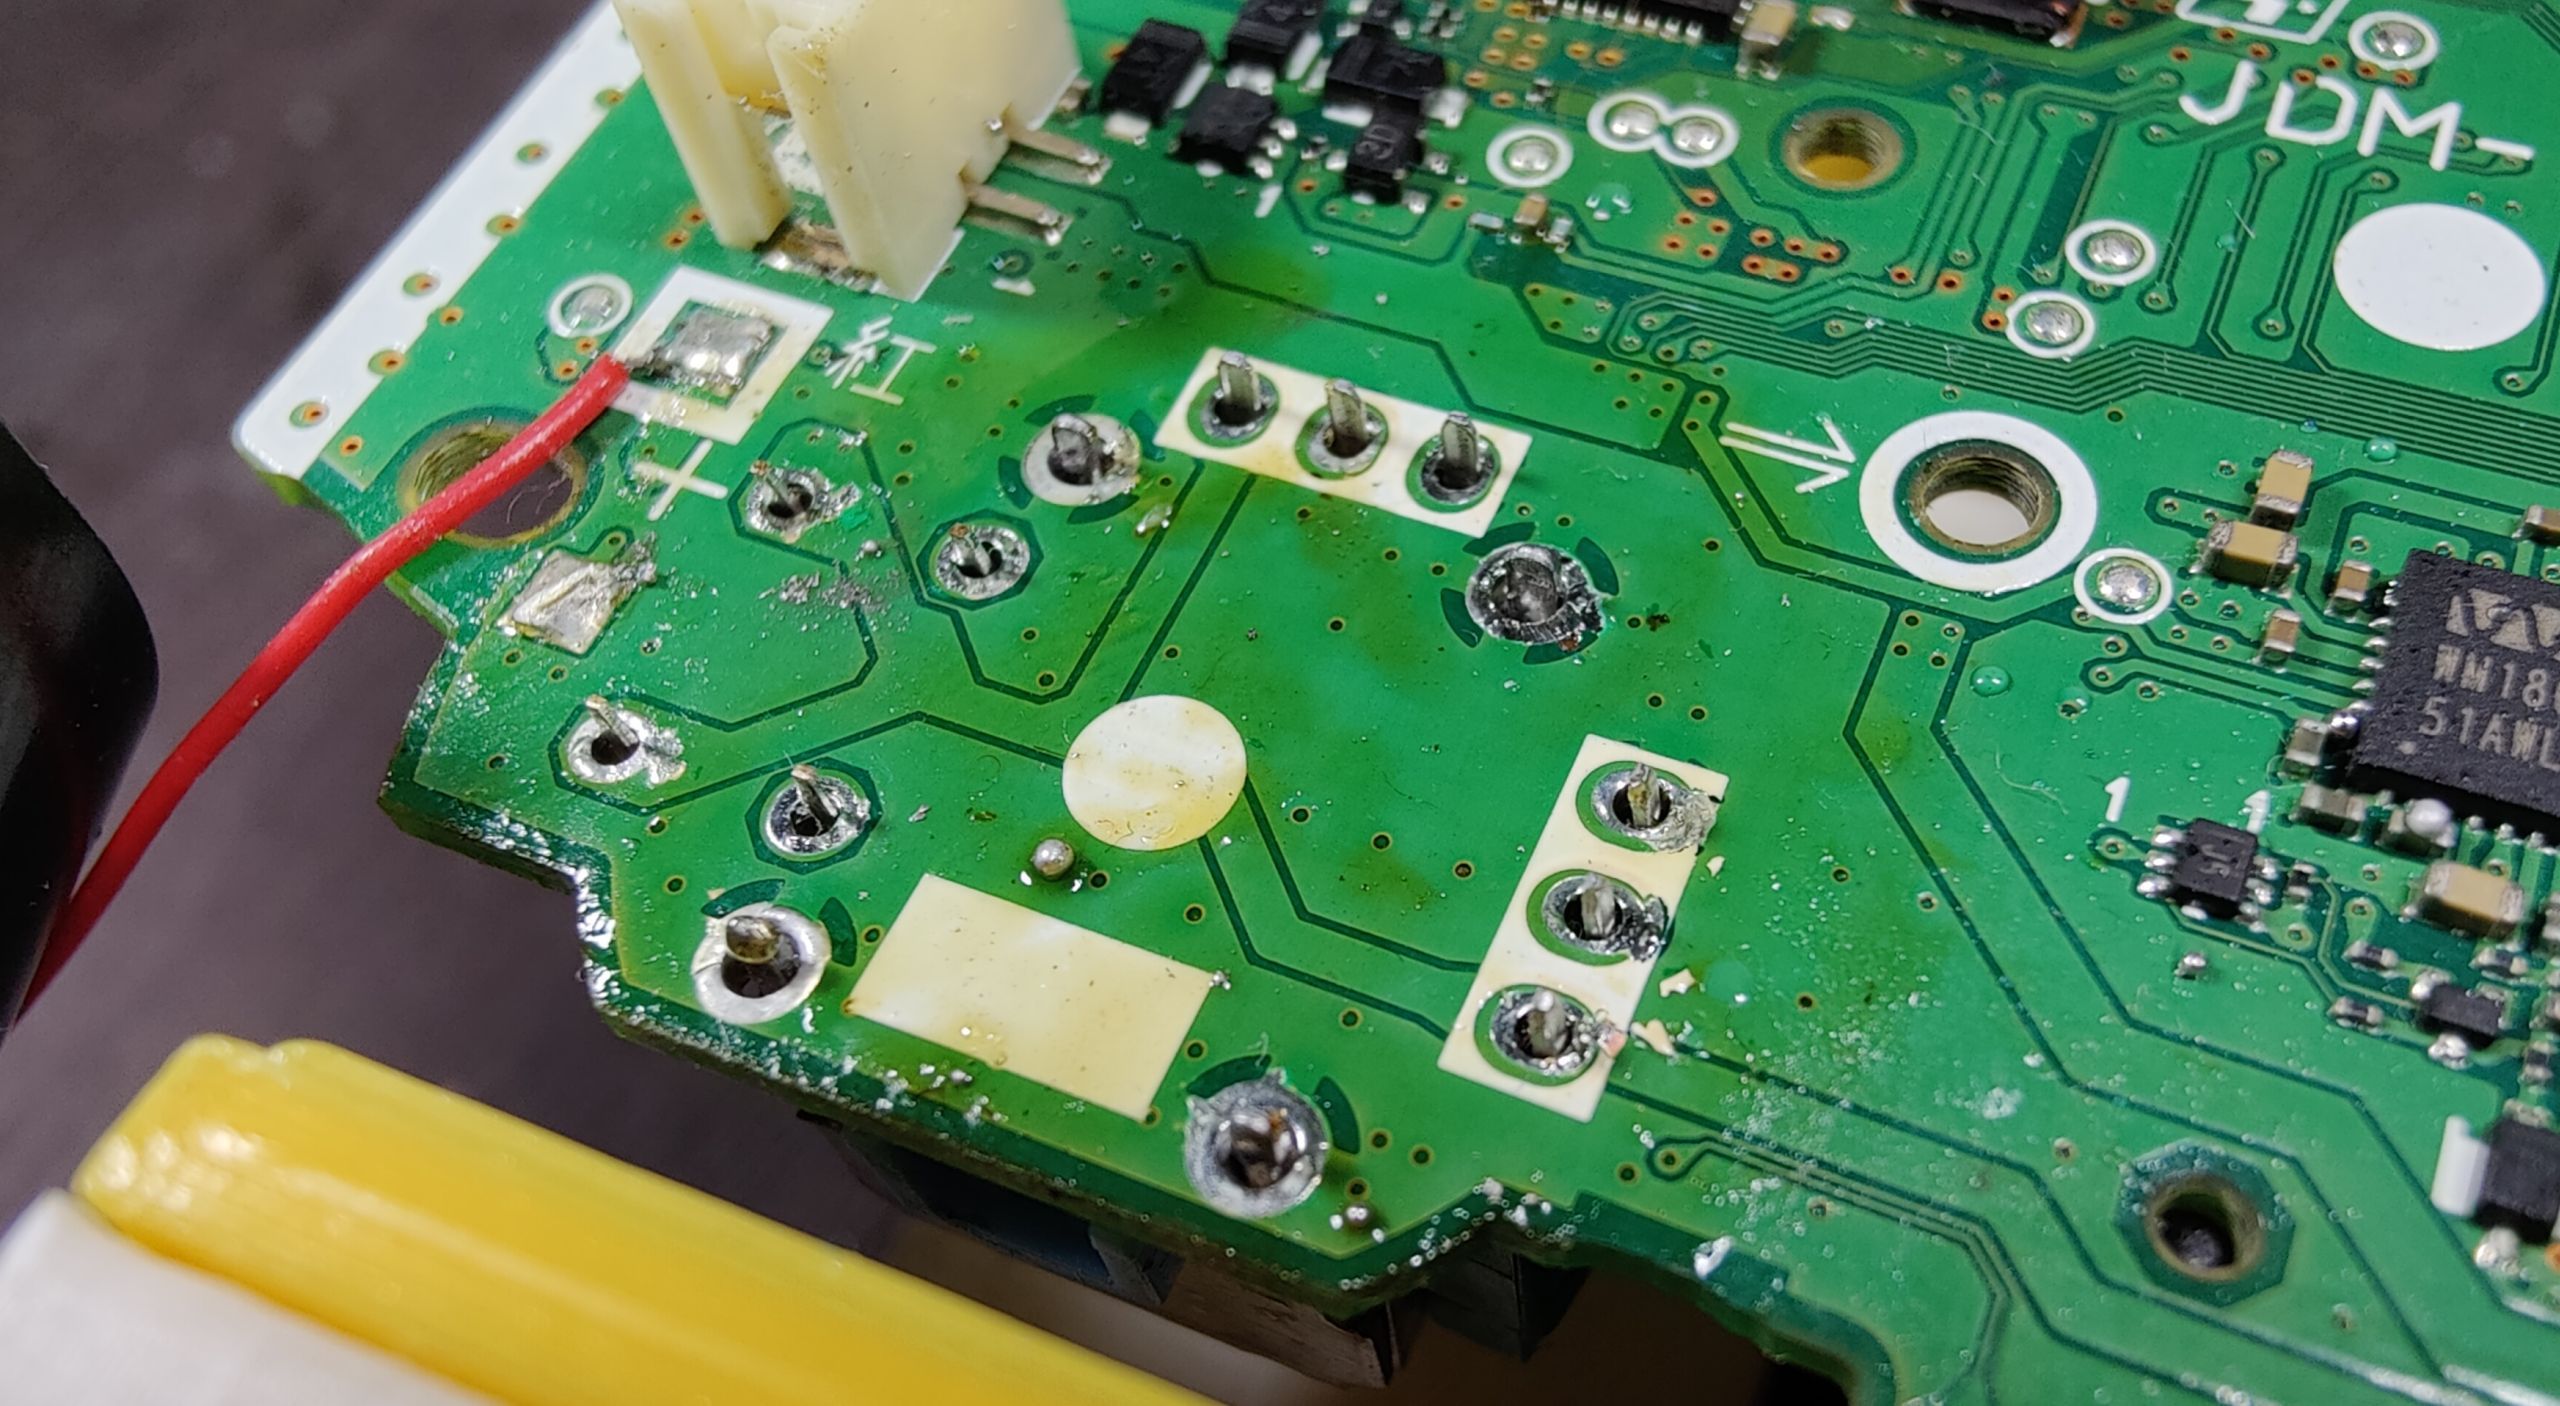 Successfully desoldered components with leads visible on the PCB